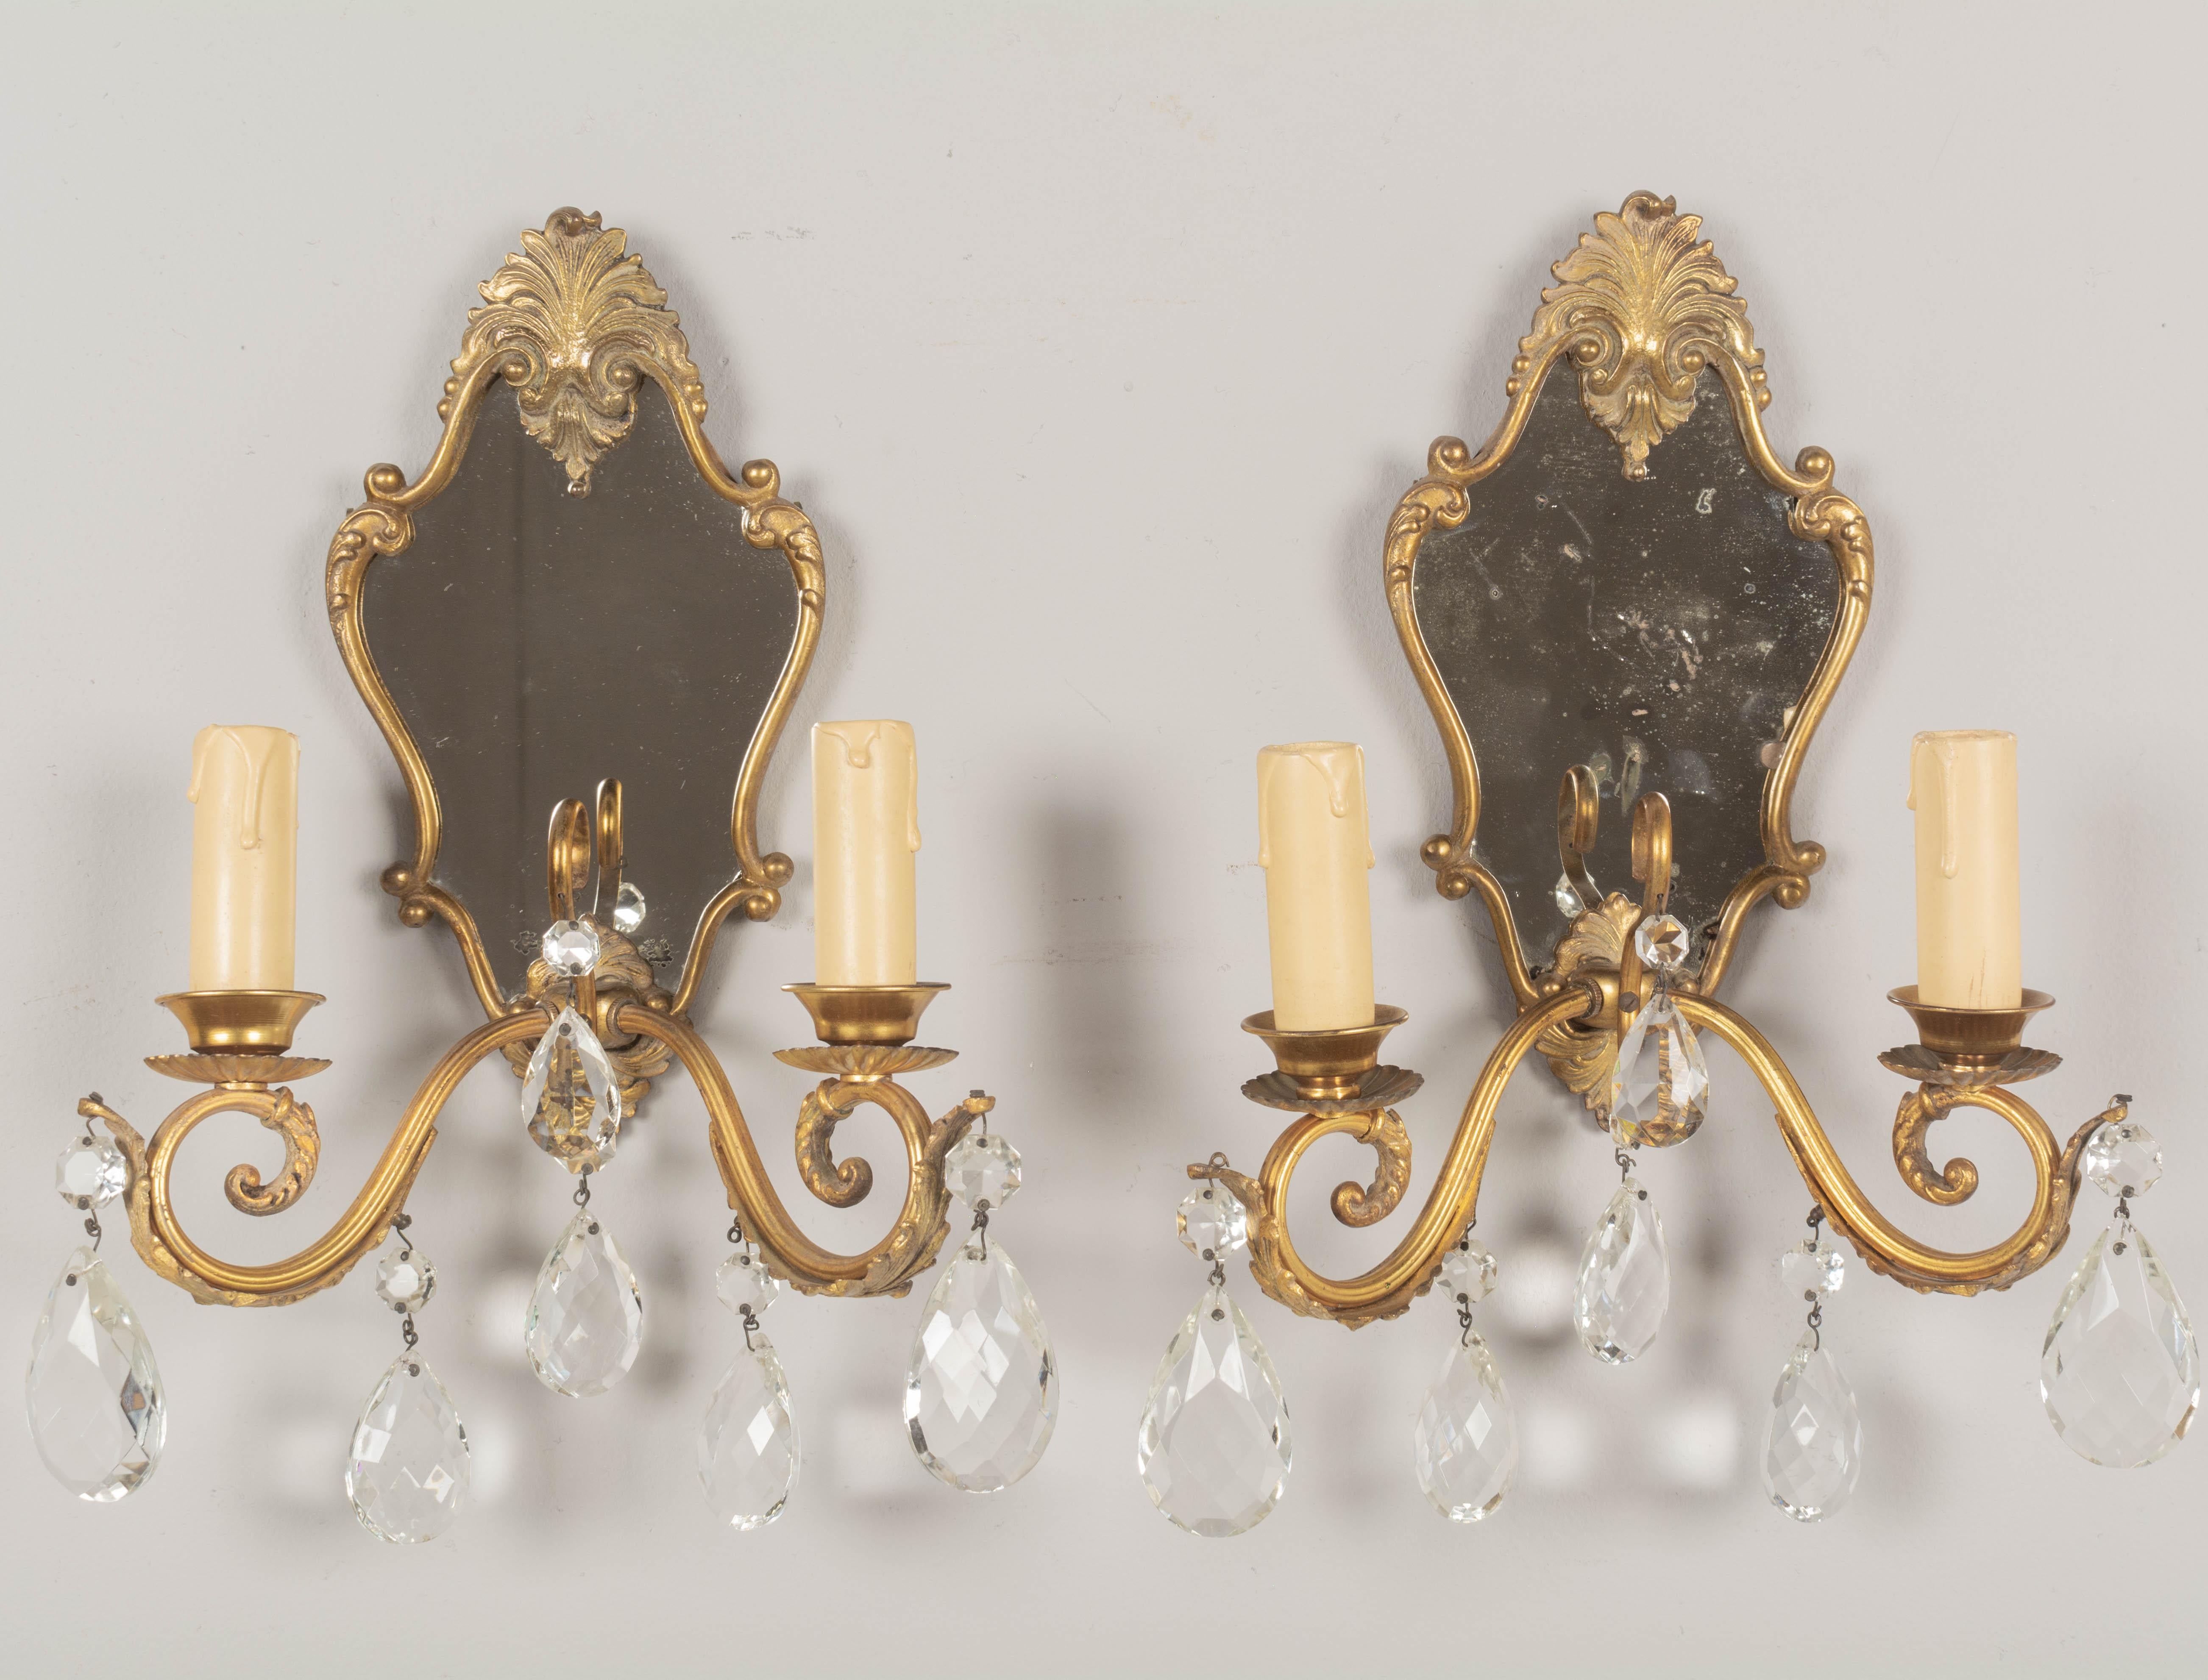 A pair of Louis XV style French cast brass and crystal sconces with mirrored backplates. Good quality heavy casting with two scrolled candle arms and cut crystal teardrop pendalogues with faceted beads. Original candle covers. Rewired with new